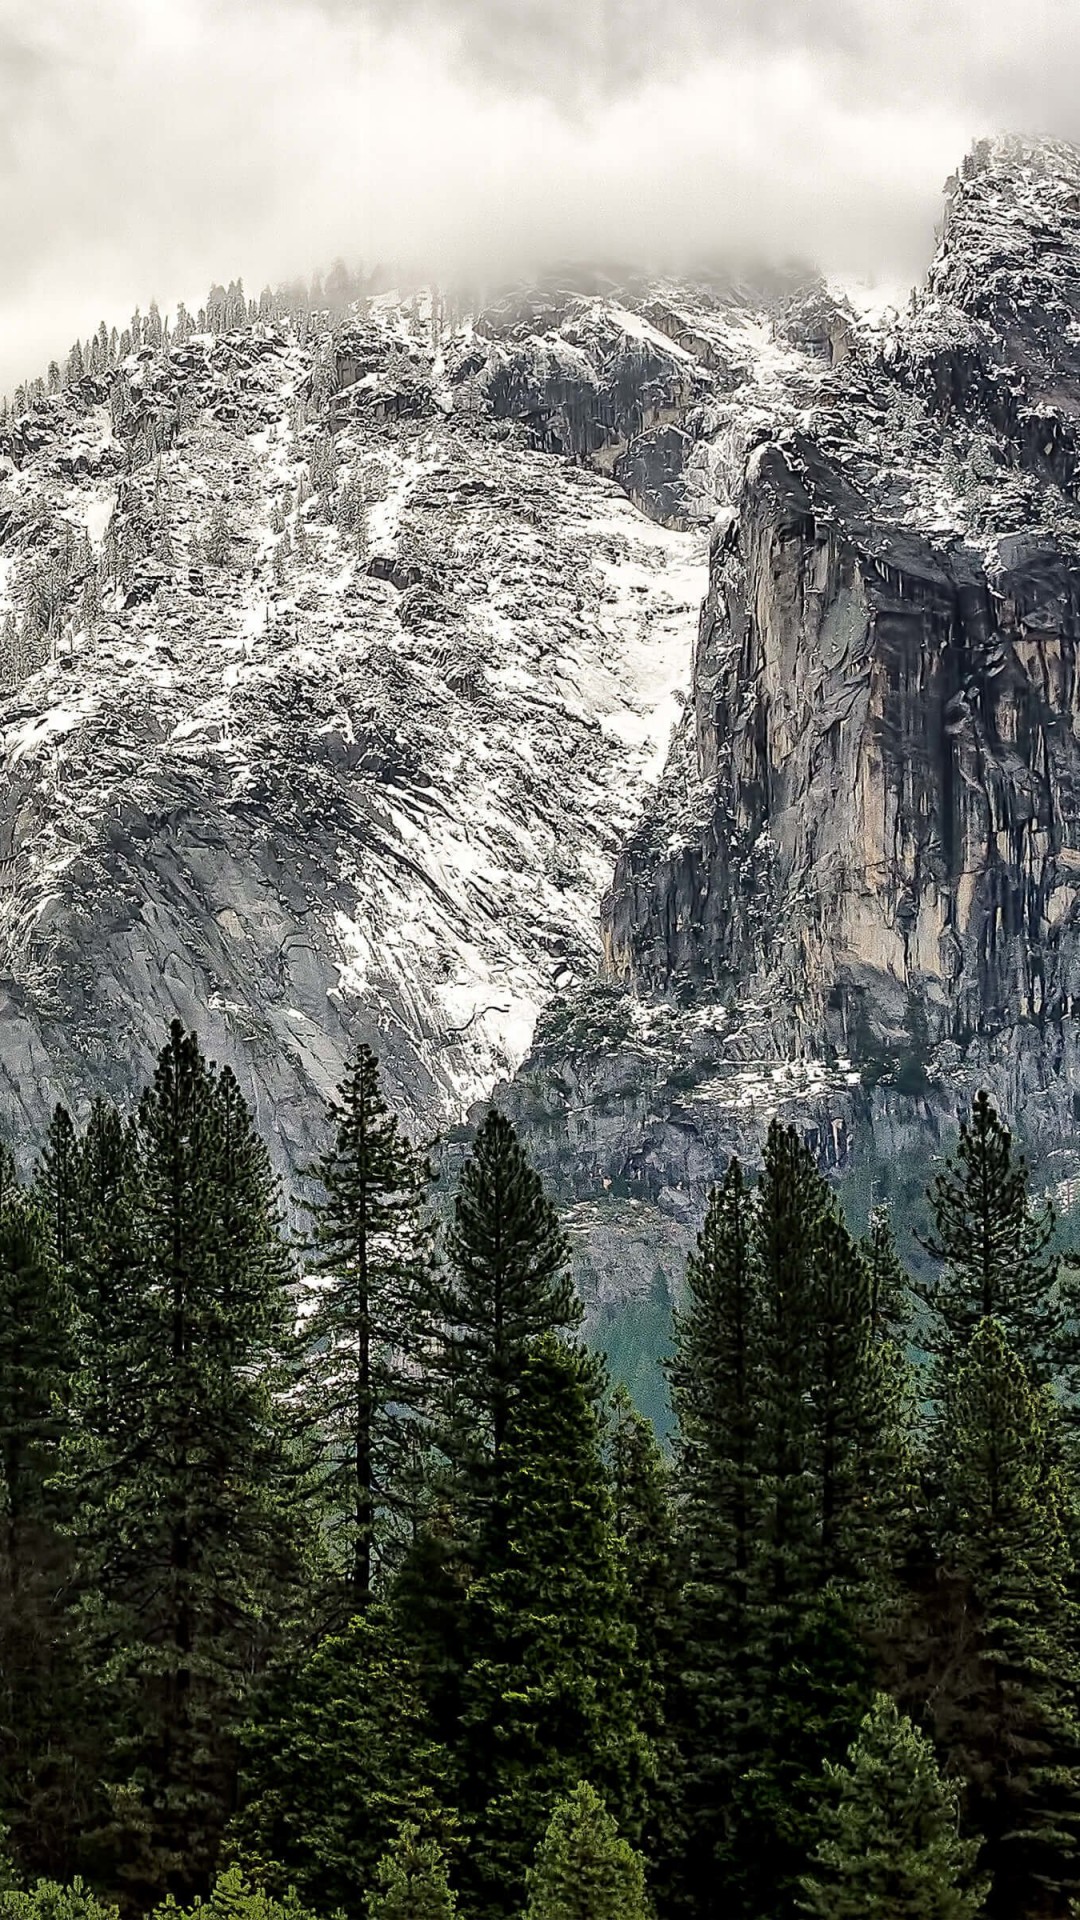 Winter Day at Yosemite National Park Wallpaper for SONY Xperia Z1